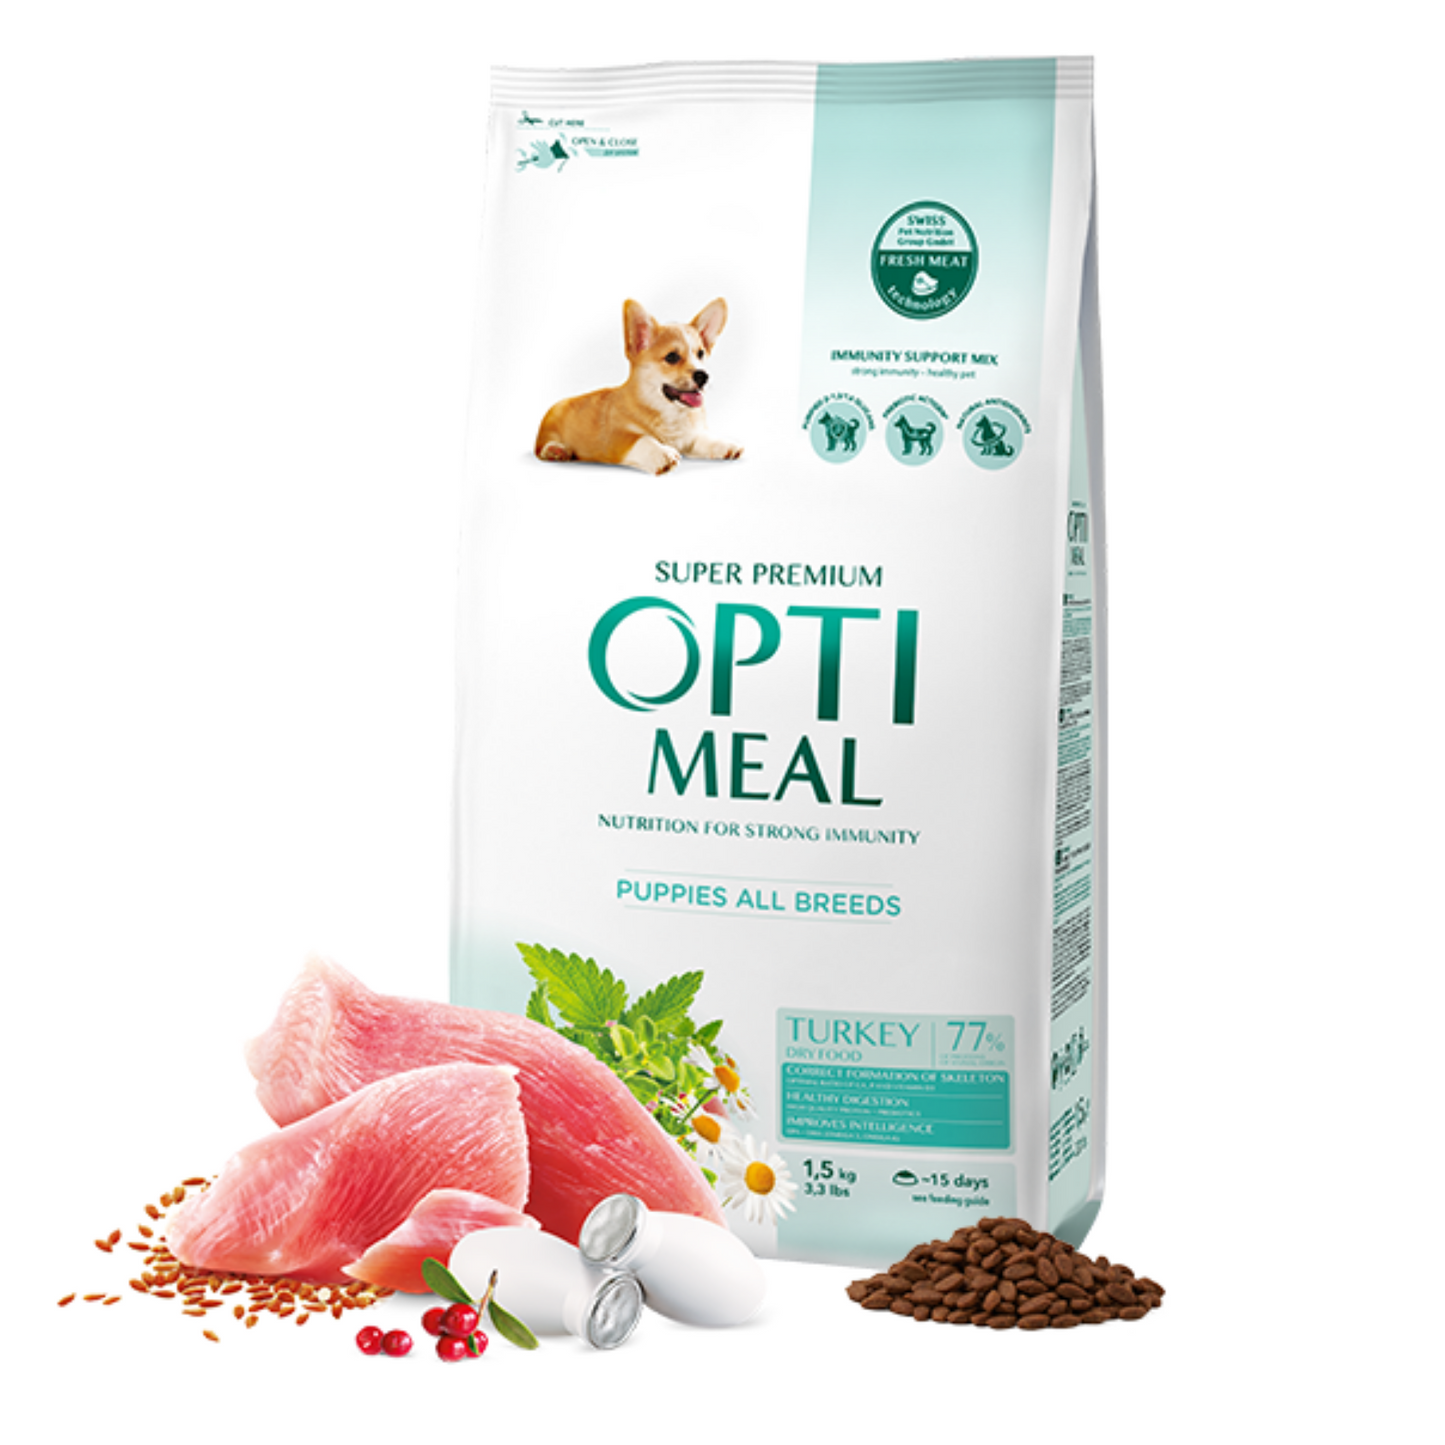 OPTIMEAL Dry dog food for puppies of all breeds with Turkey